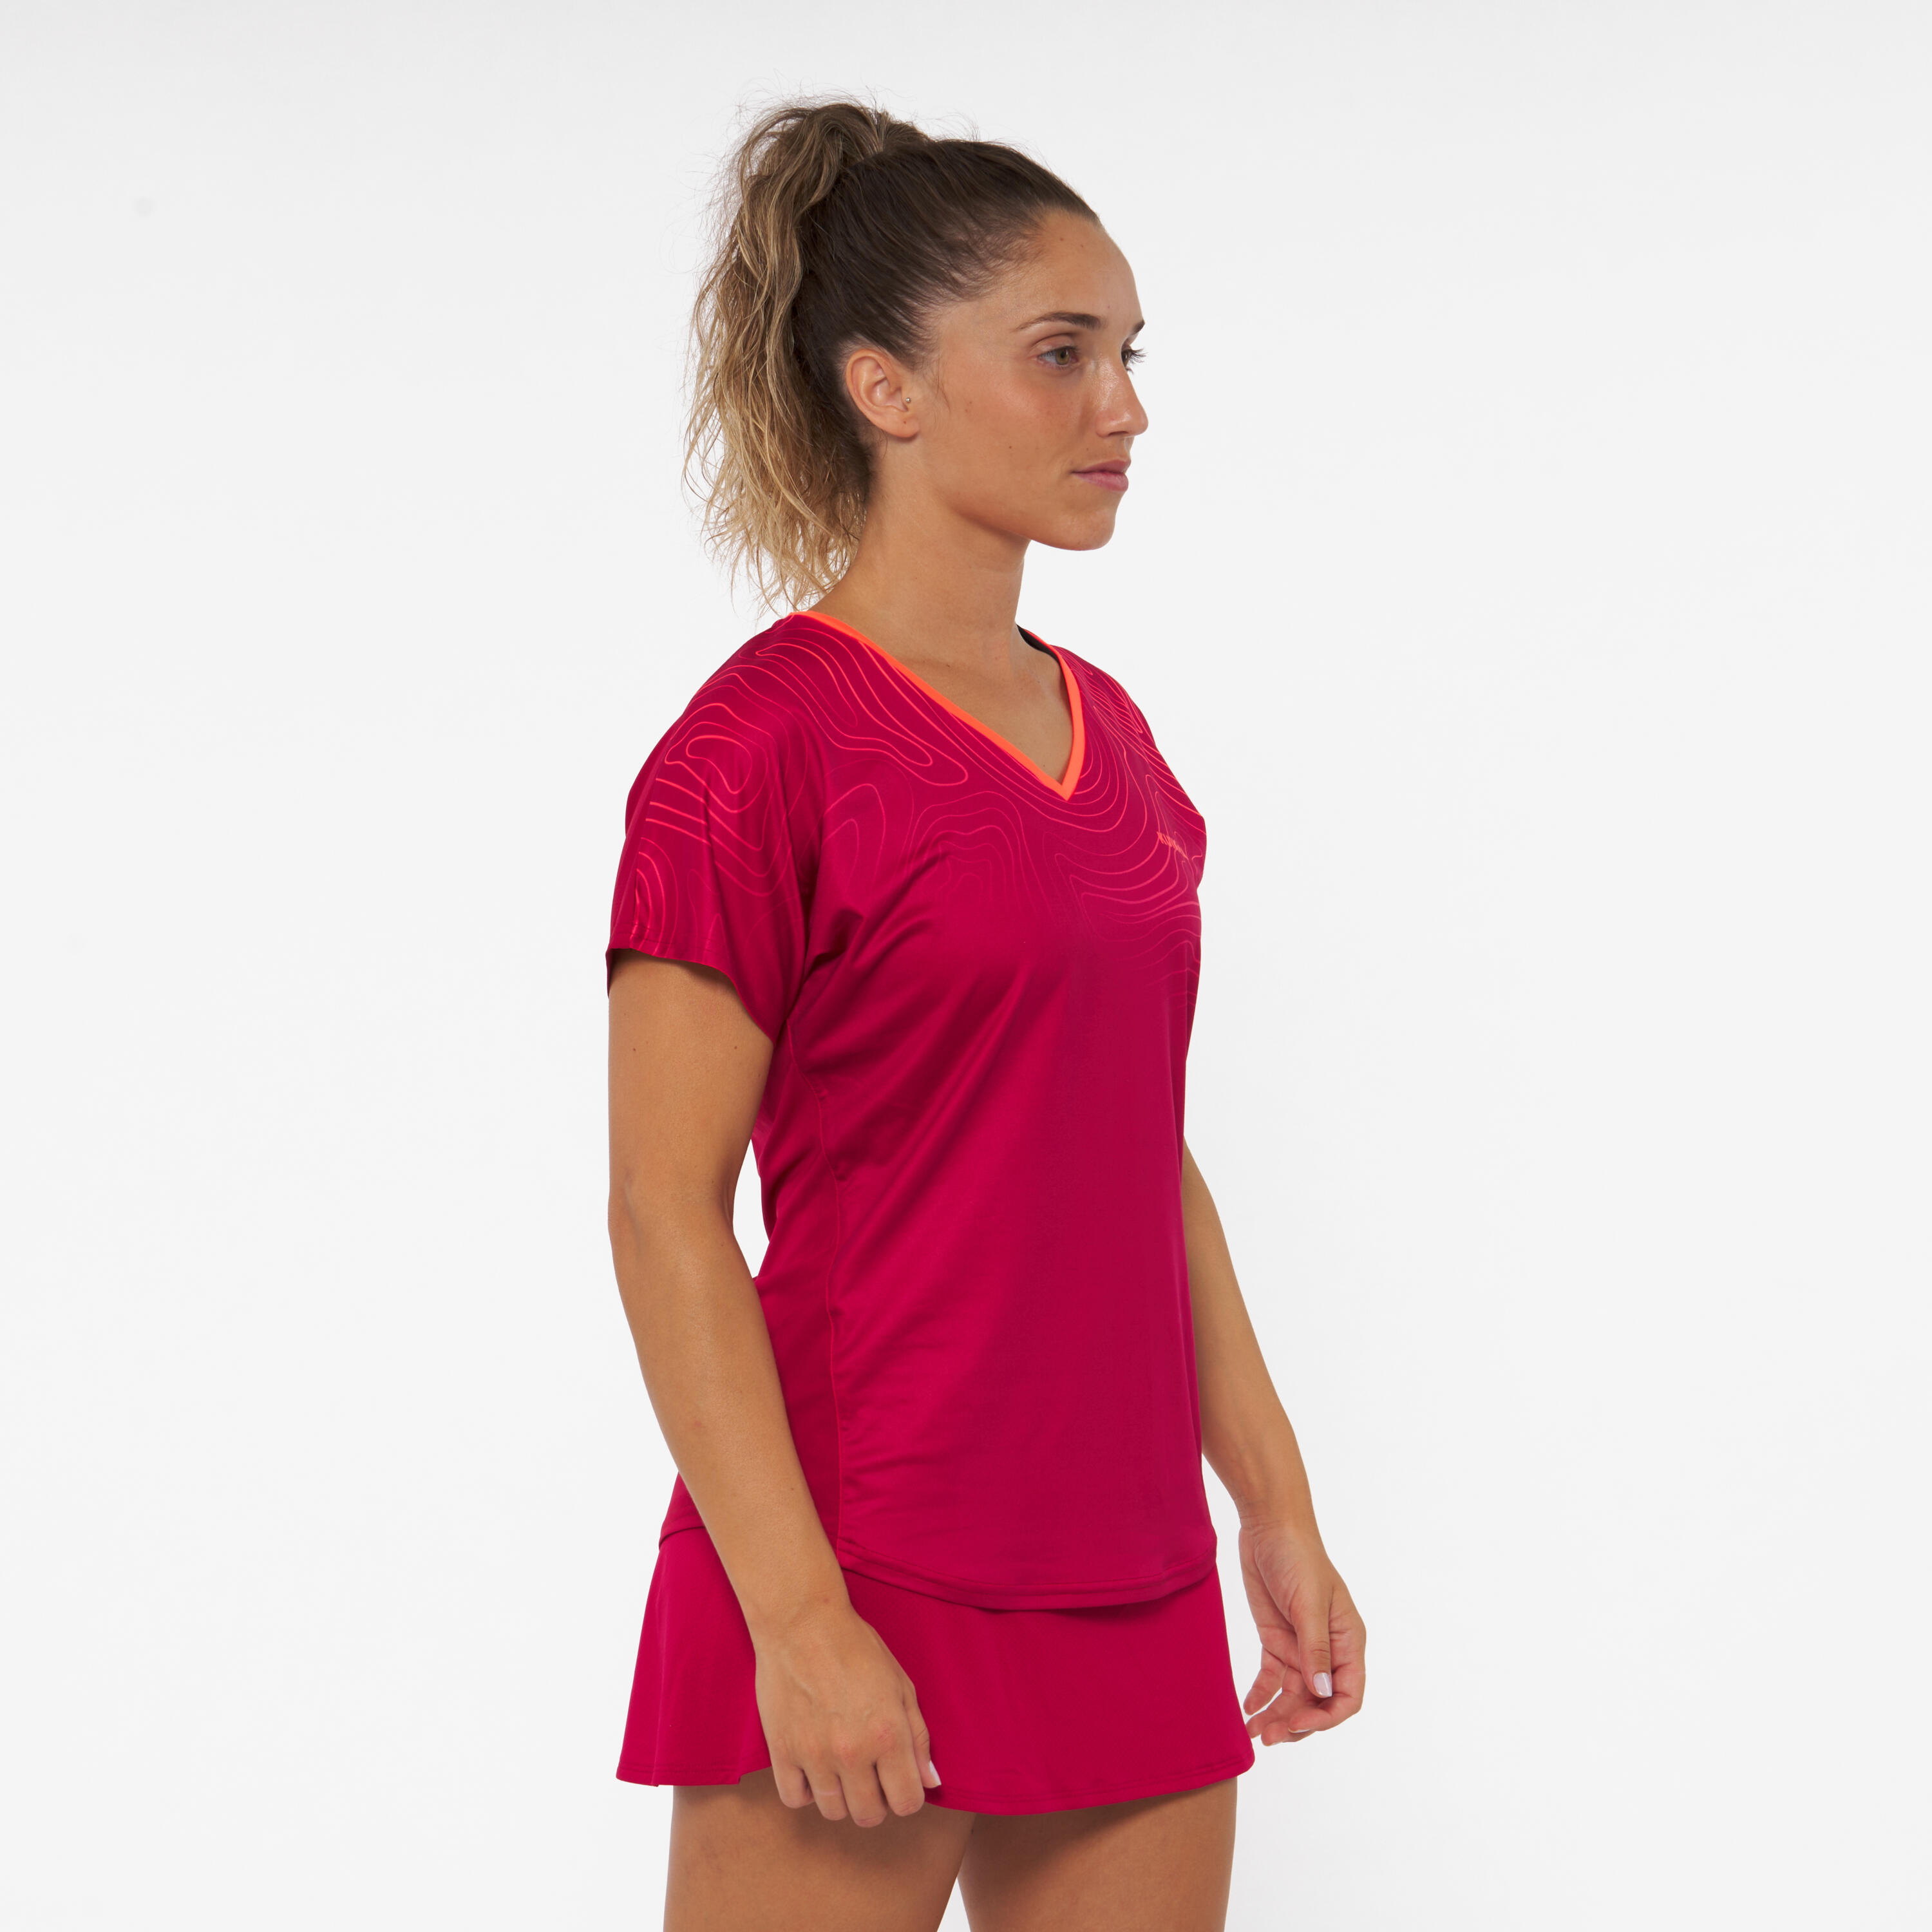 Women's Breathable Short-Sleeved Padel T-Shirt 500 - Red 5/7